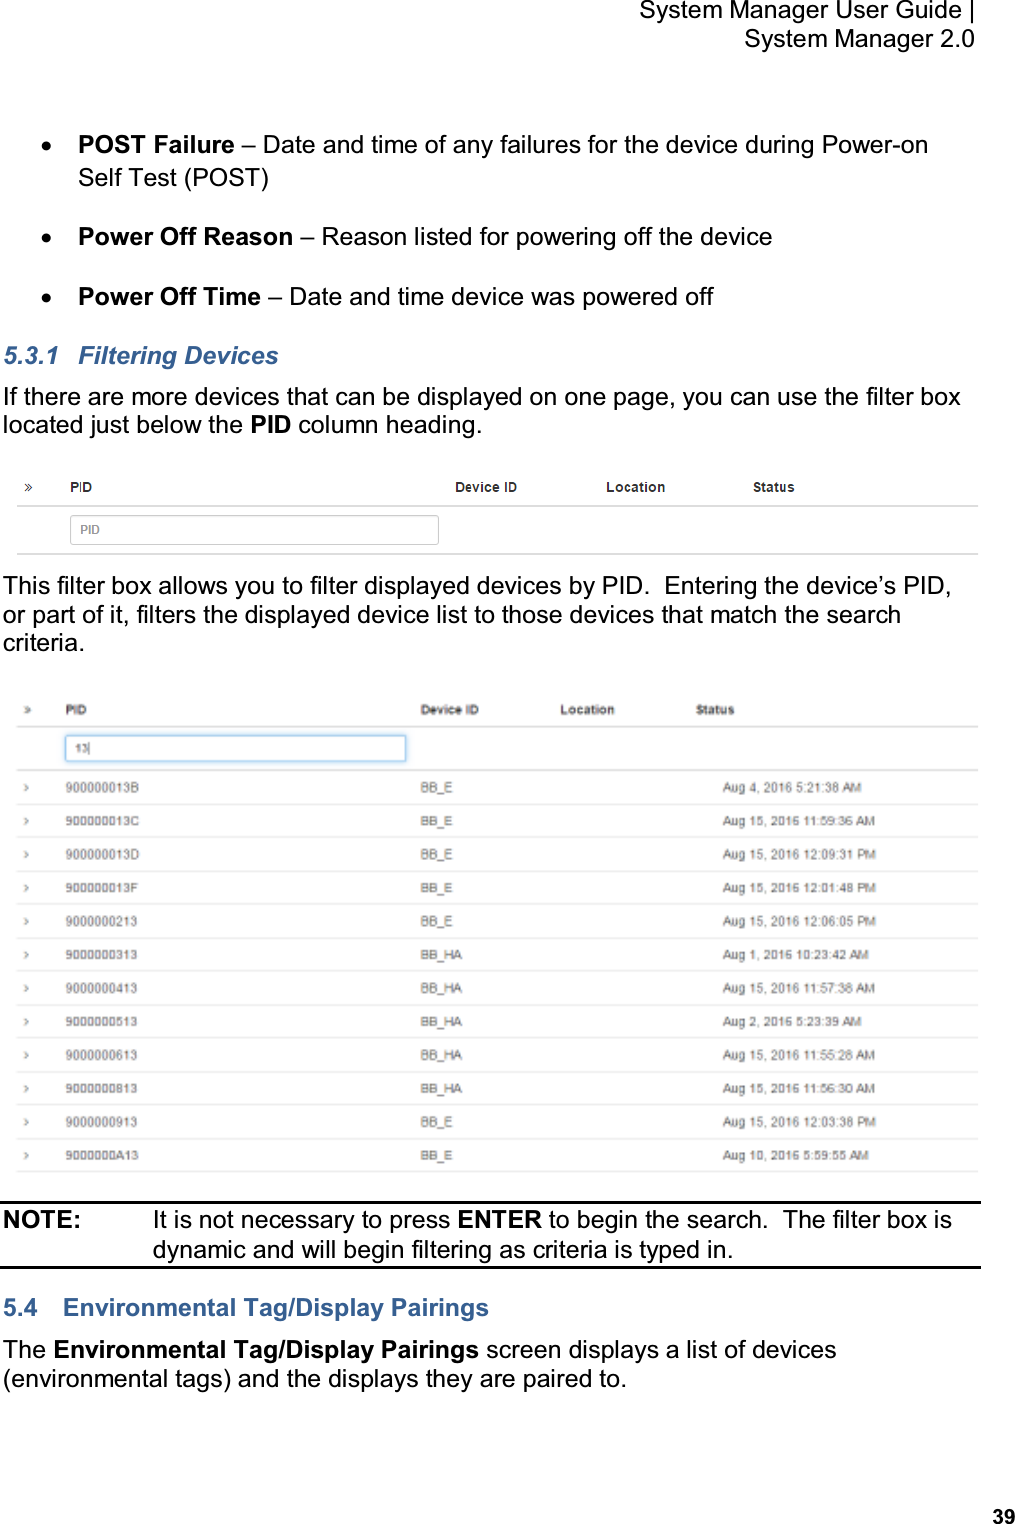           39 System Manager User Guide |  System Manager 2.0 • POST Failure – Date and time of any failures for the device during Power-on Self Test (POST) • Power Off Reason – Reason listed for powering off the device • Power Off Time – Date and time device was powered off 5.3.1  Filtering Devices If there are more devices that can be displayed on one page, you can use the filter box located just below the PID column heading.  This filter box allows you to filter displayed devices by PID.  Entering the device’s PID, or part of it, filters the displayed device list to those devices that match the search criteria.  NOTE:    It is not necessary to press ENTER to begin the search.  The filter box is dynamic and will begin filtering as criteria is typed in. 5.4  Environmental Tag/Display Pairings The Environmental Tag/Display Pairings screen displays a list of devices (environmental tags) and the displays they are paired to. 